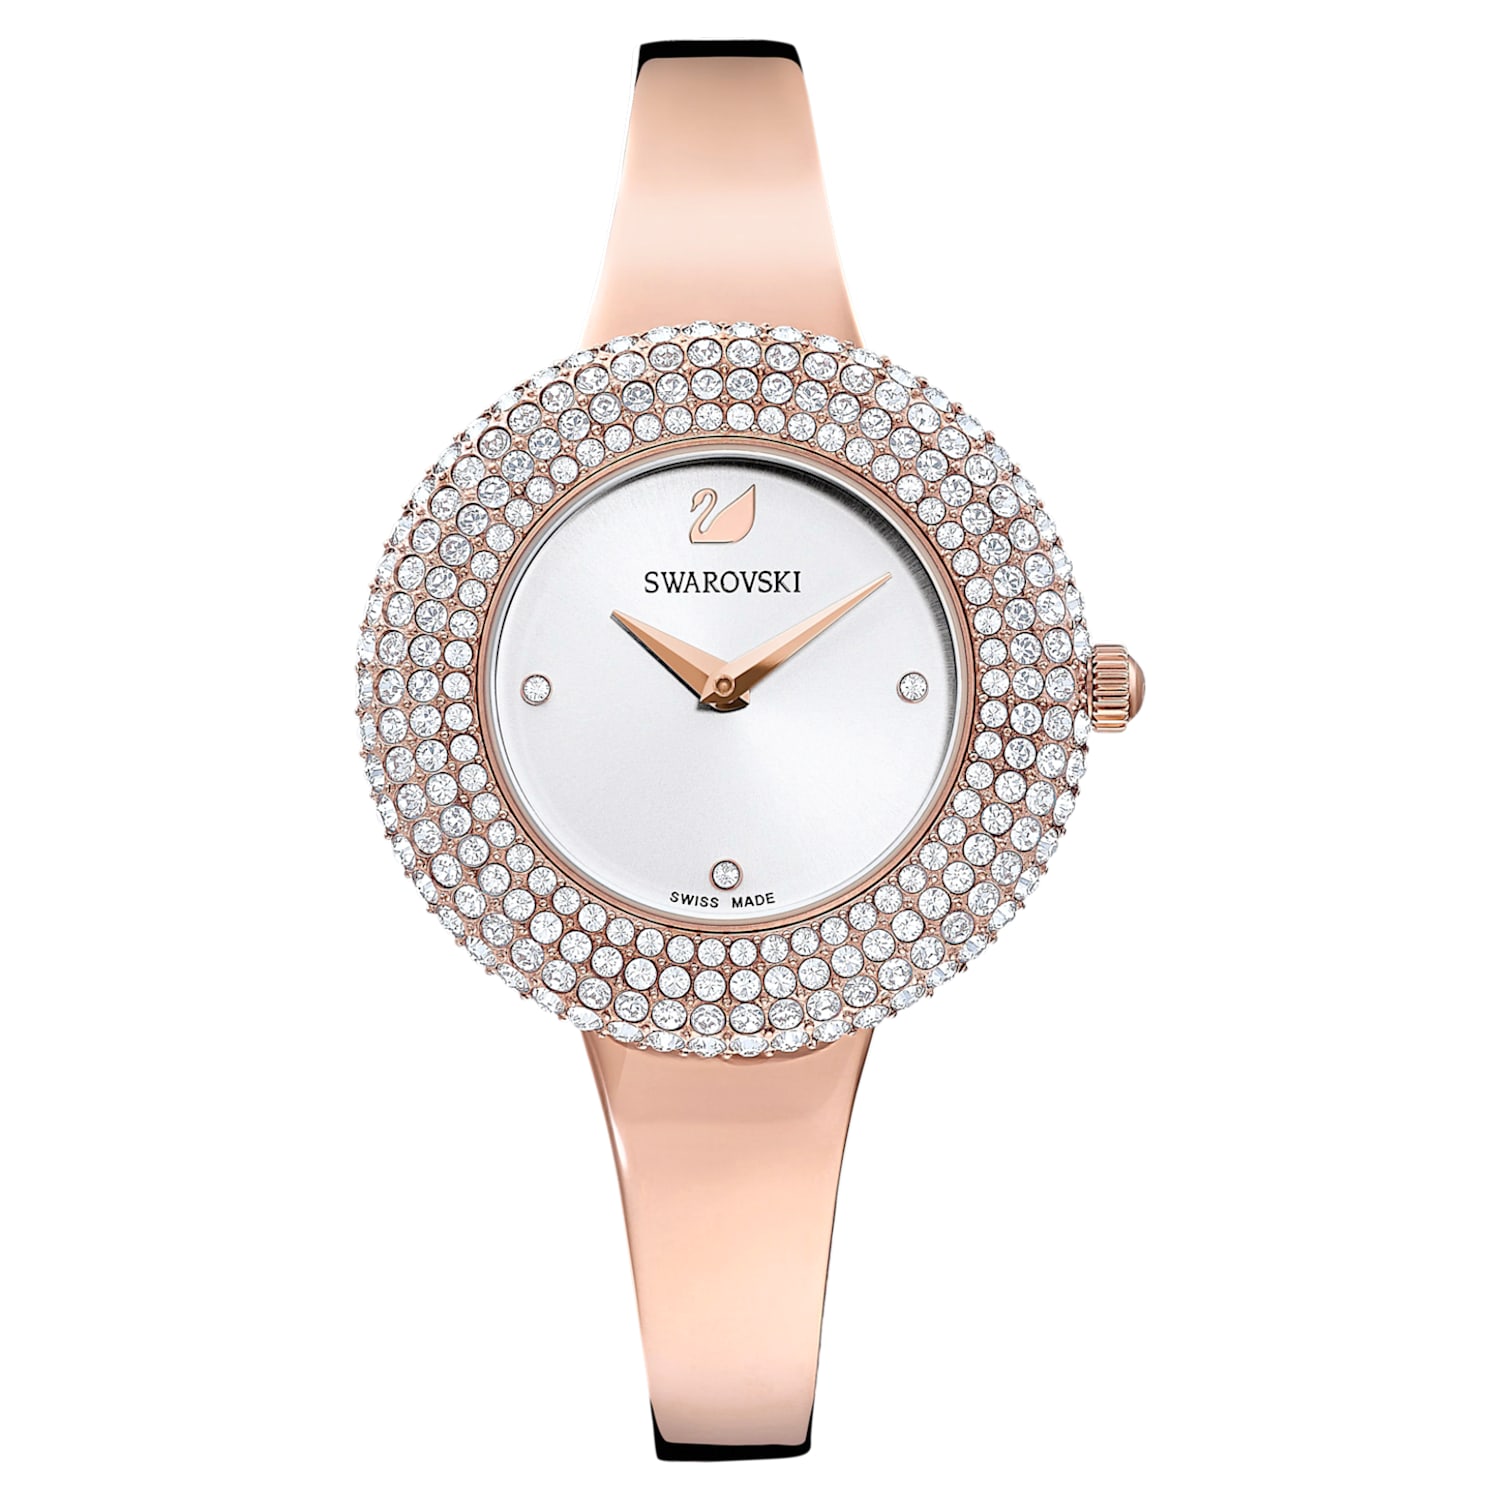 Ophef Verhuizer Controversieel Crystal Rose watch, Swiss Made, Metal bracelet, Rose gold tone, Rose  gold-tone finish